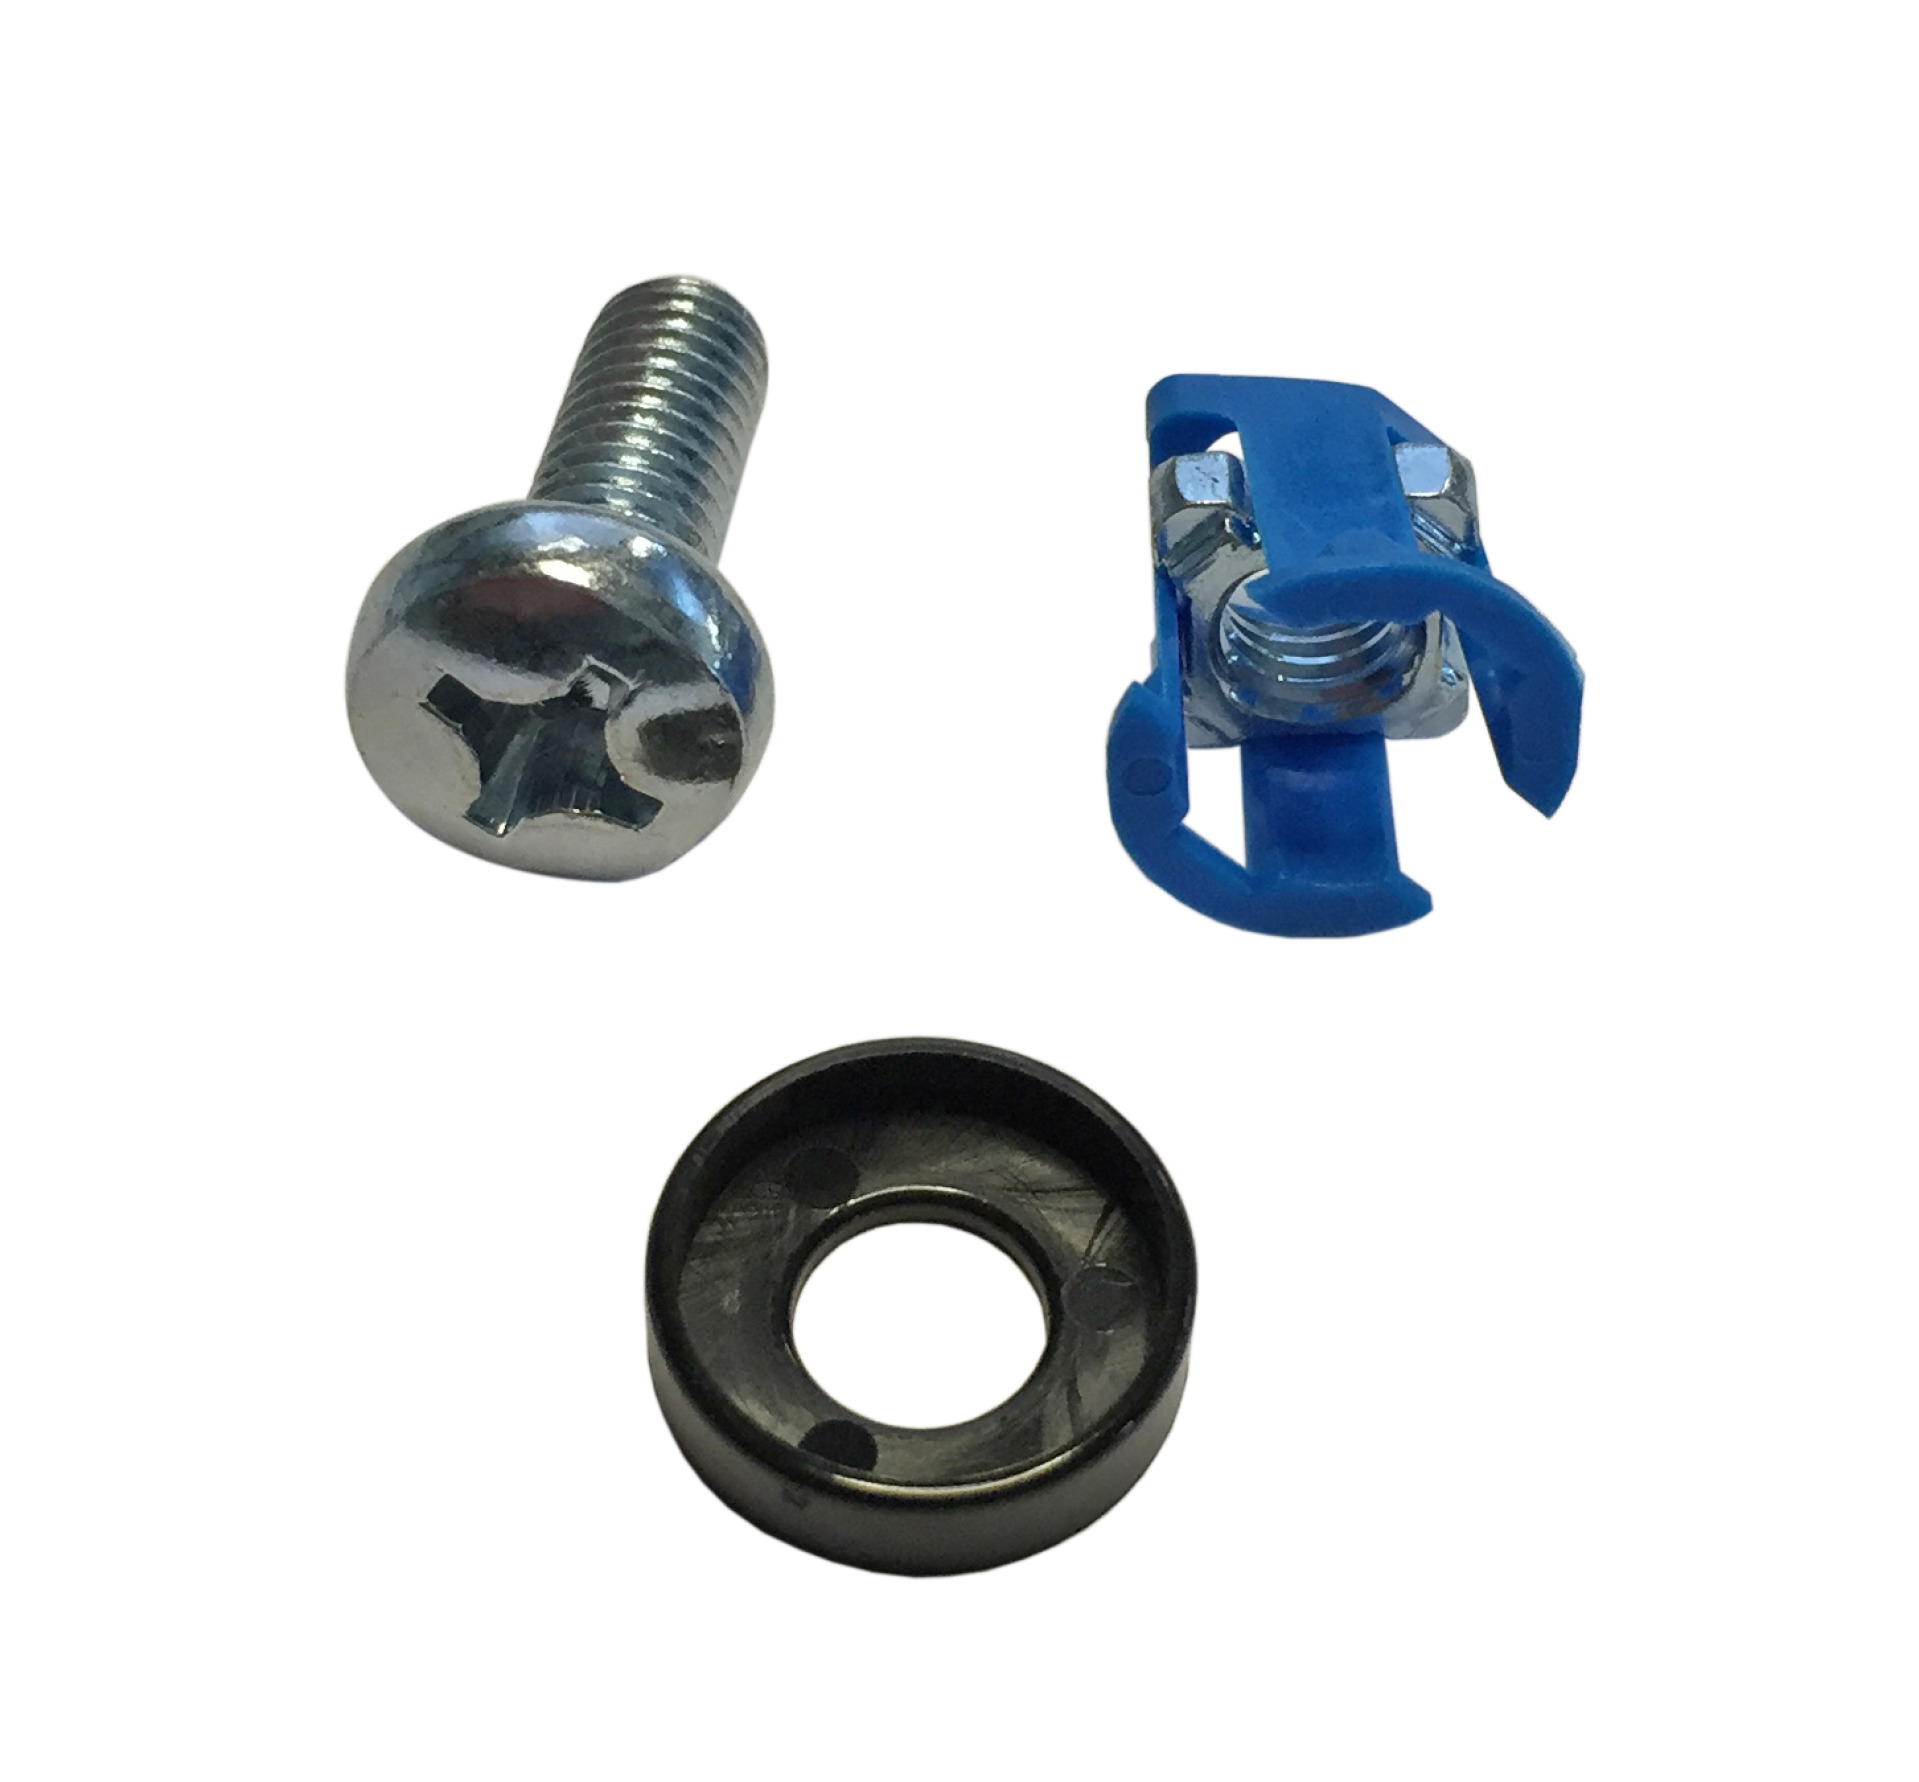 Set of Captive Nuts 50 x M5 for Front Mounting (50 x Nut., Screw, Washer)